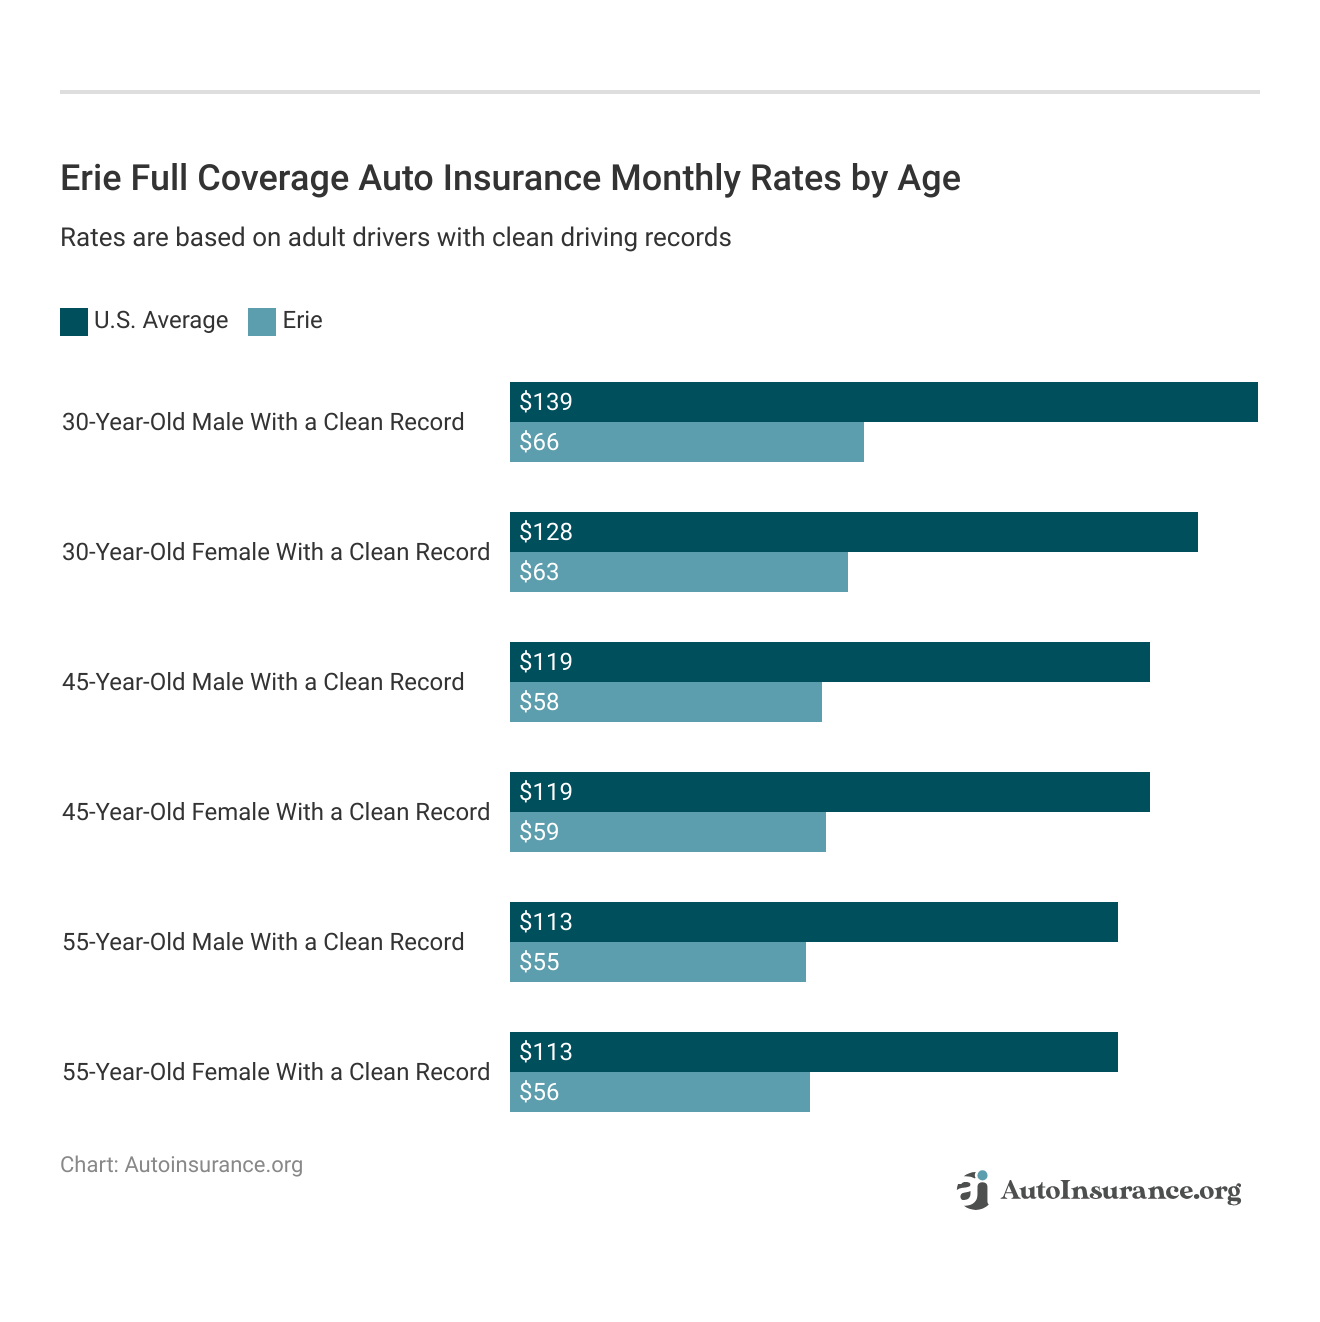 <h3>Erie Full Coverage Auto Insurance Monthly Rates by Age</h3>